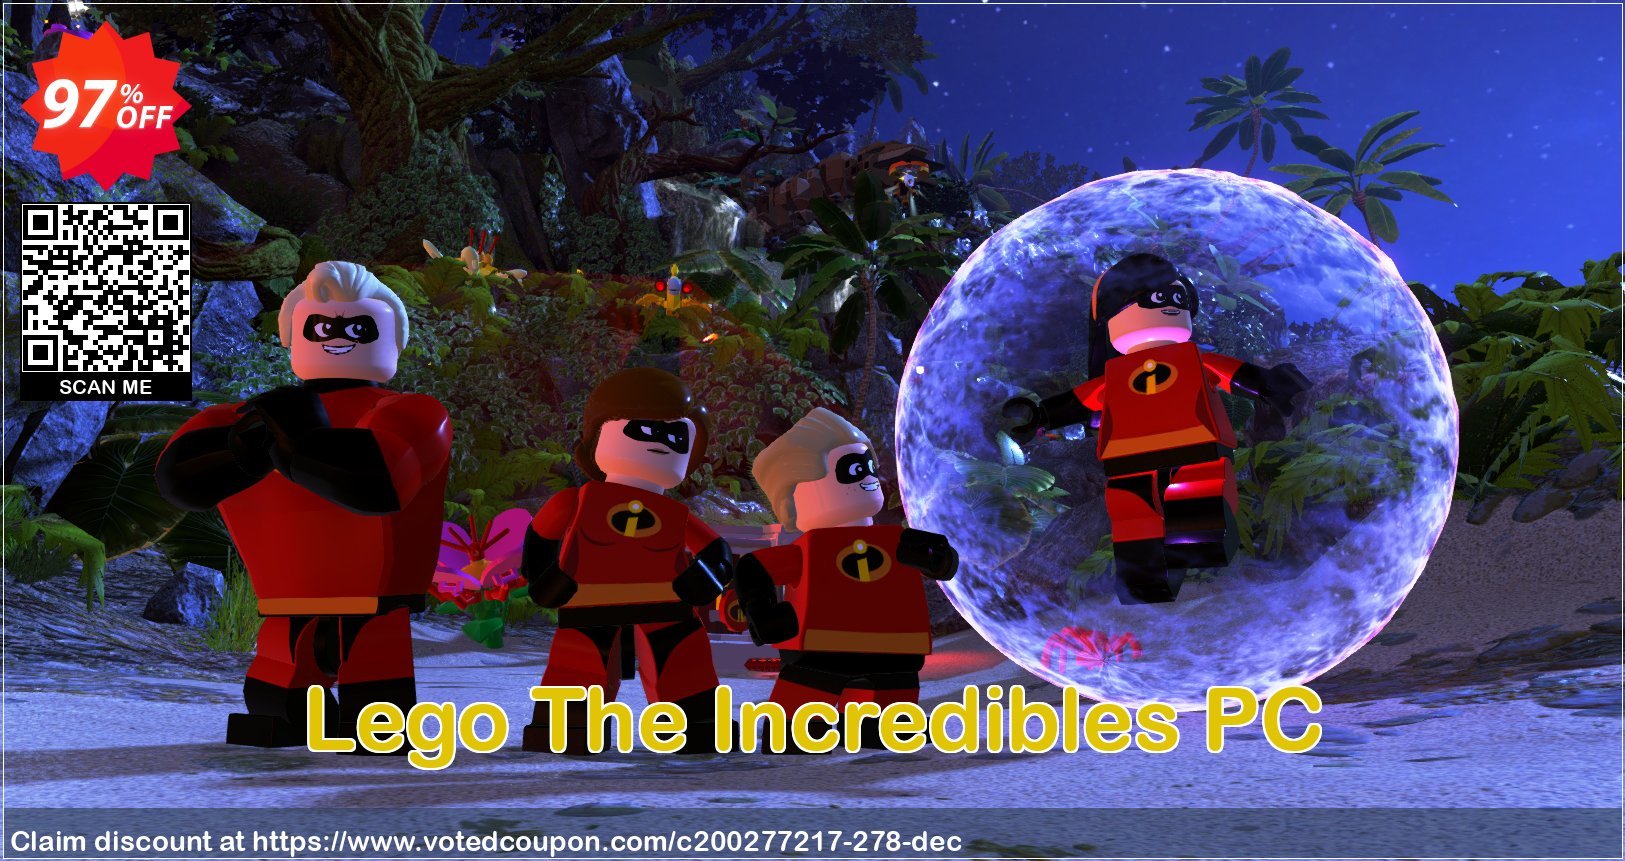 Lego The Incredibles PC Coupon Code May 2024, 97% OFF - VotedCoupon